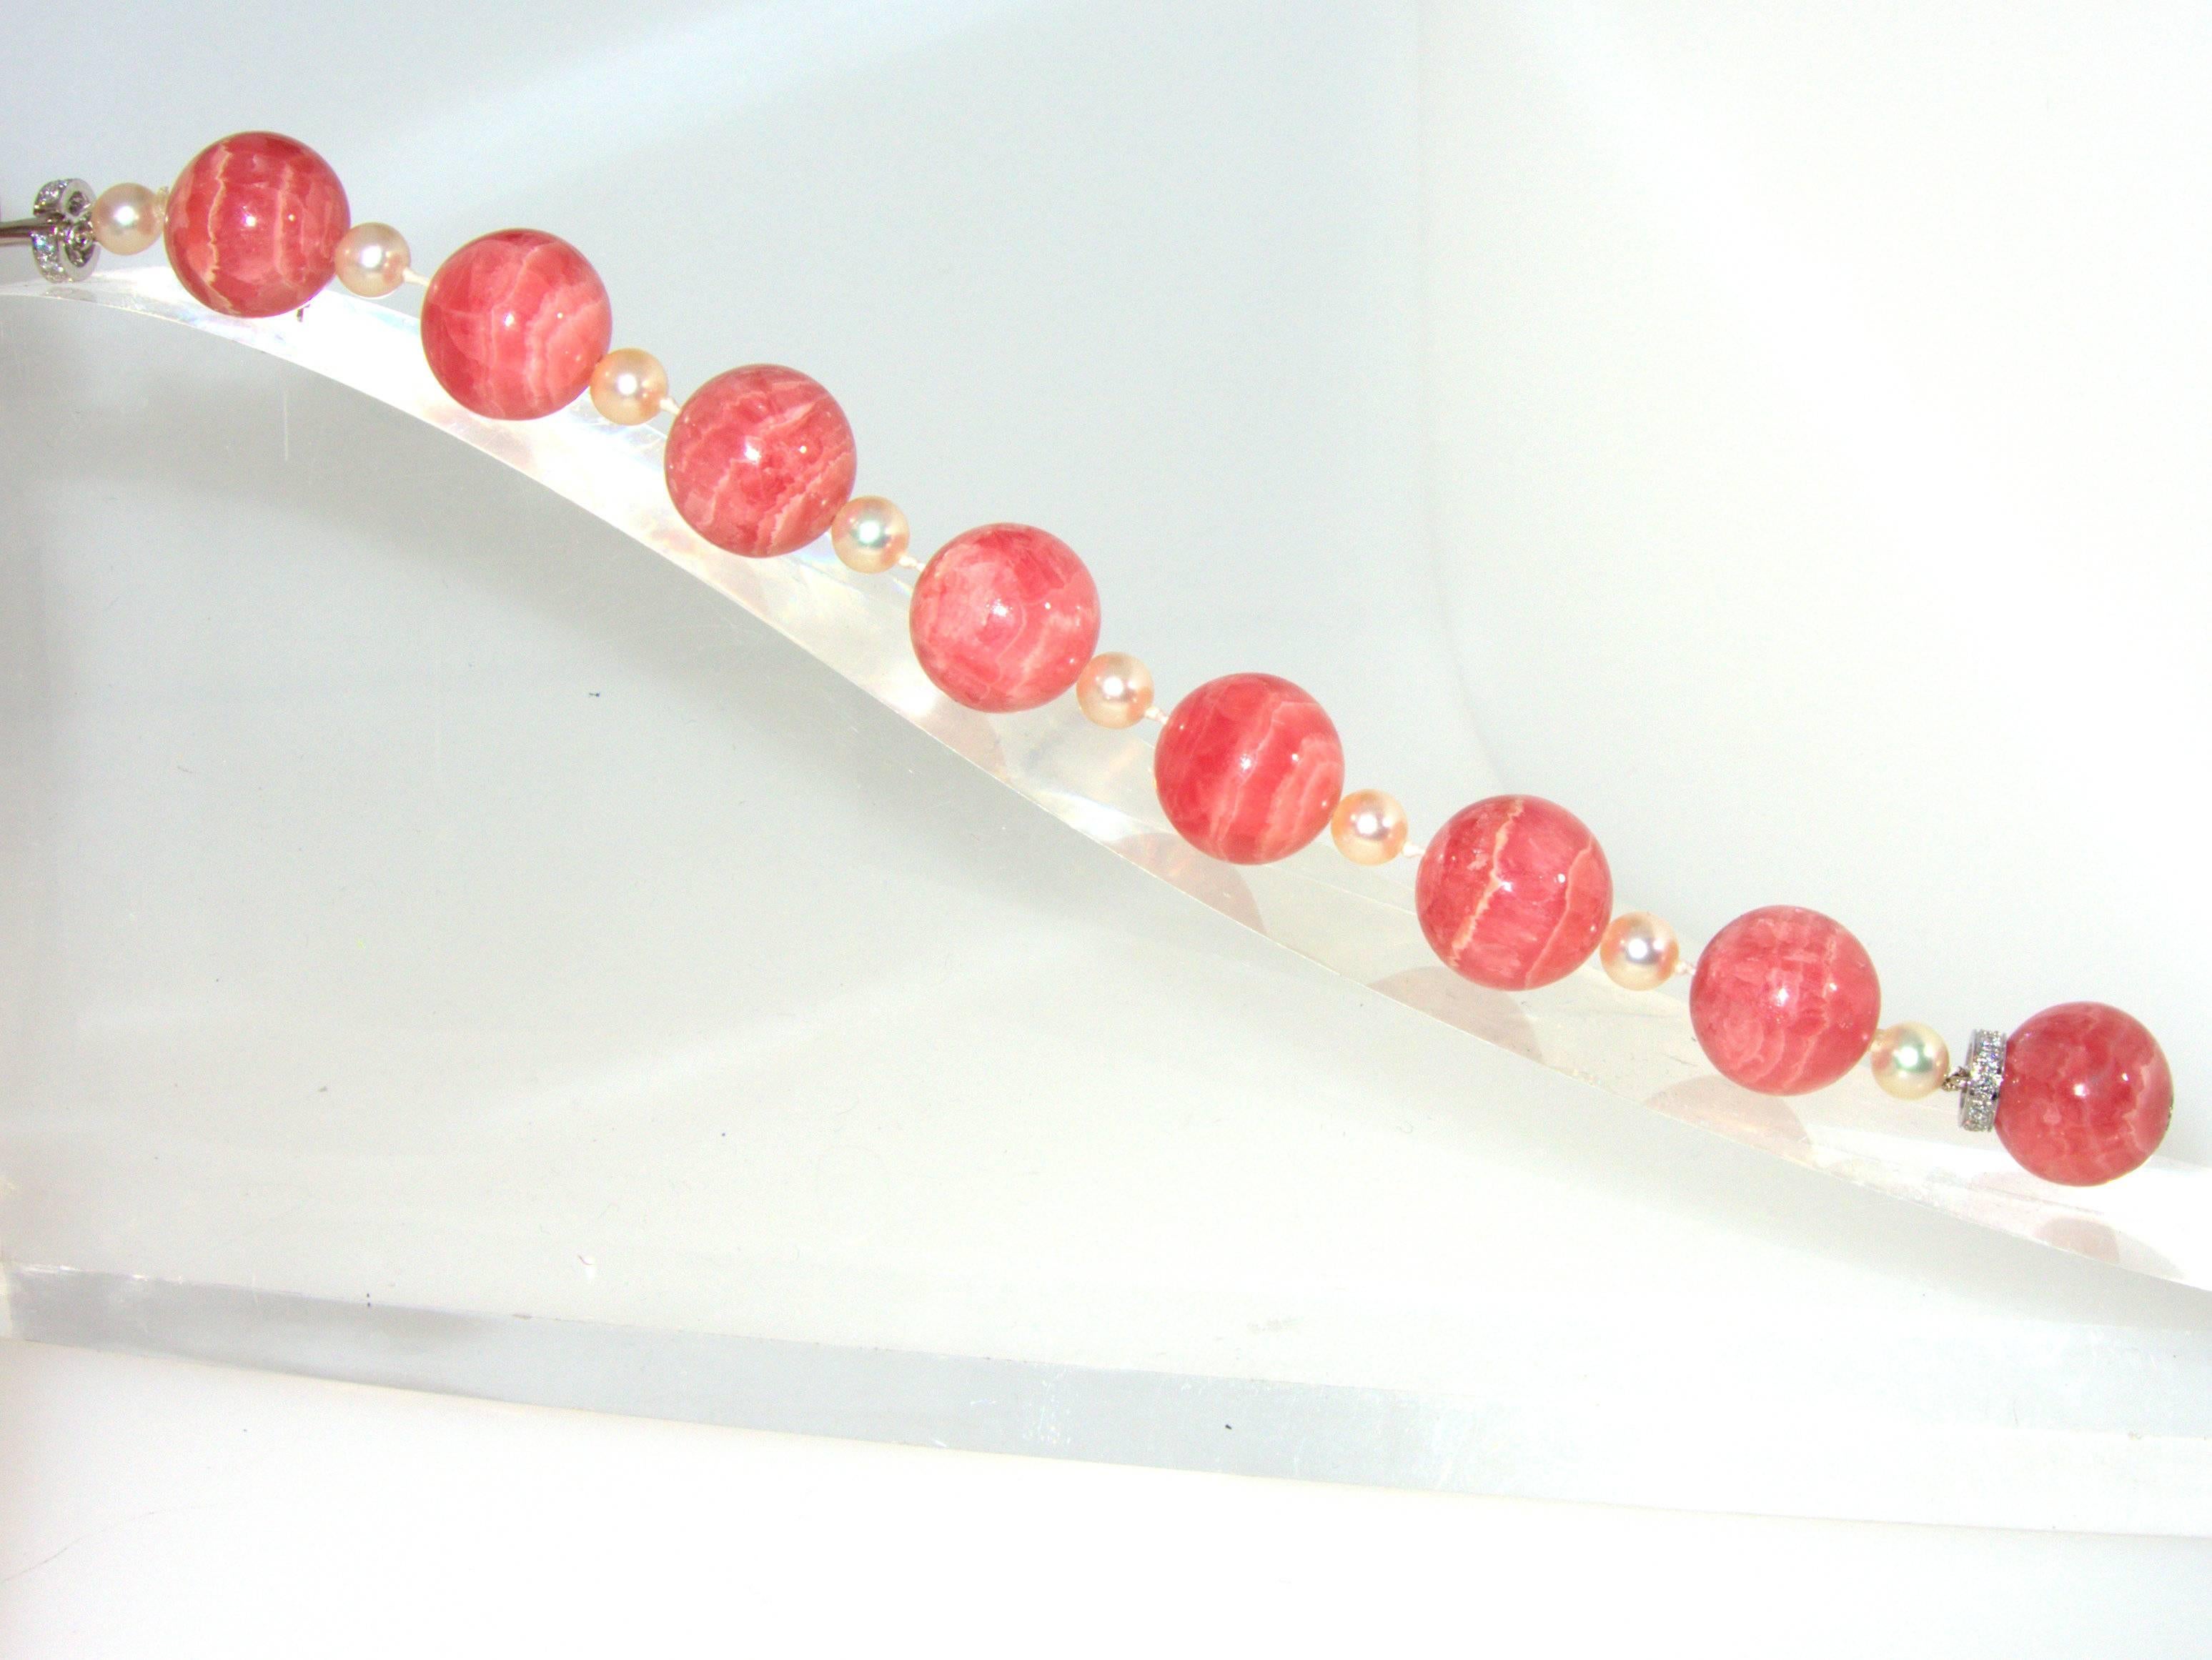 16 mm spheres of the unusual stone Rhodochrosite are interspersed with white pearls and finished with a diamond clasp.  Rhodochrosite comes from Argentina and one rarely sees the stone and especially in such finely cut round balls.  